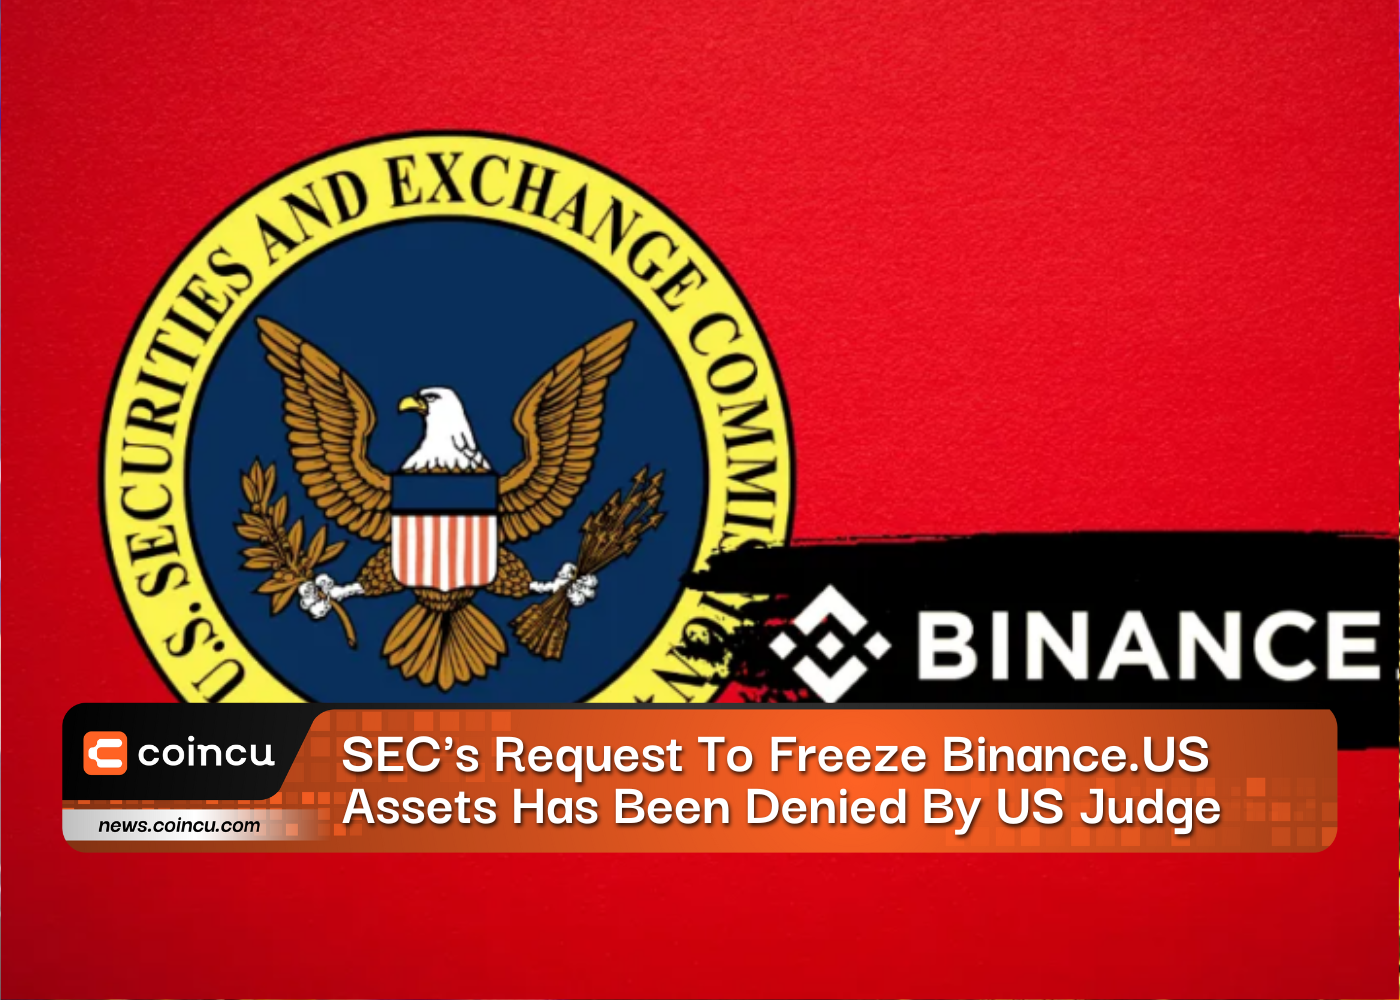 SEC's Request To Freeze Binance.US Assets Has Been Denied By US Judge